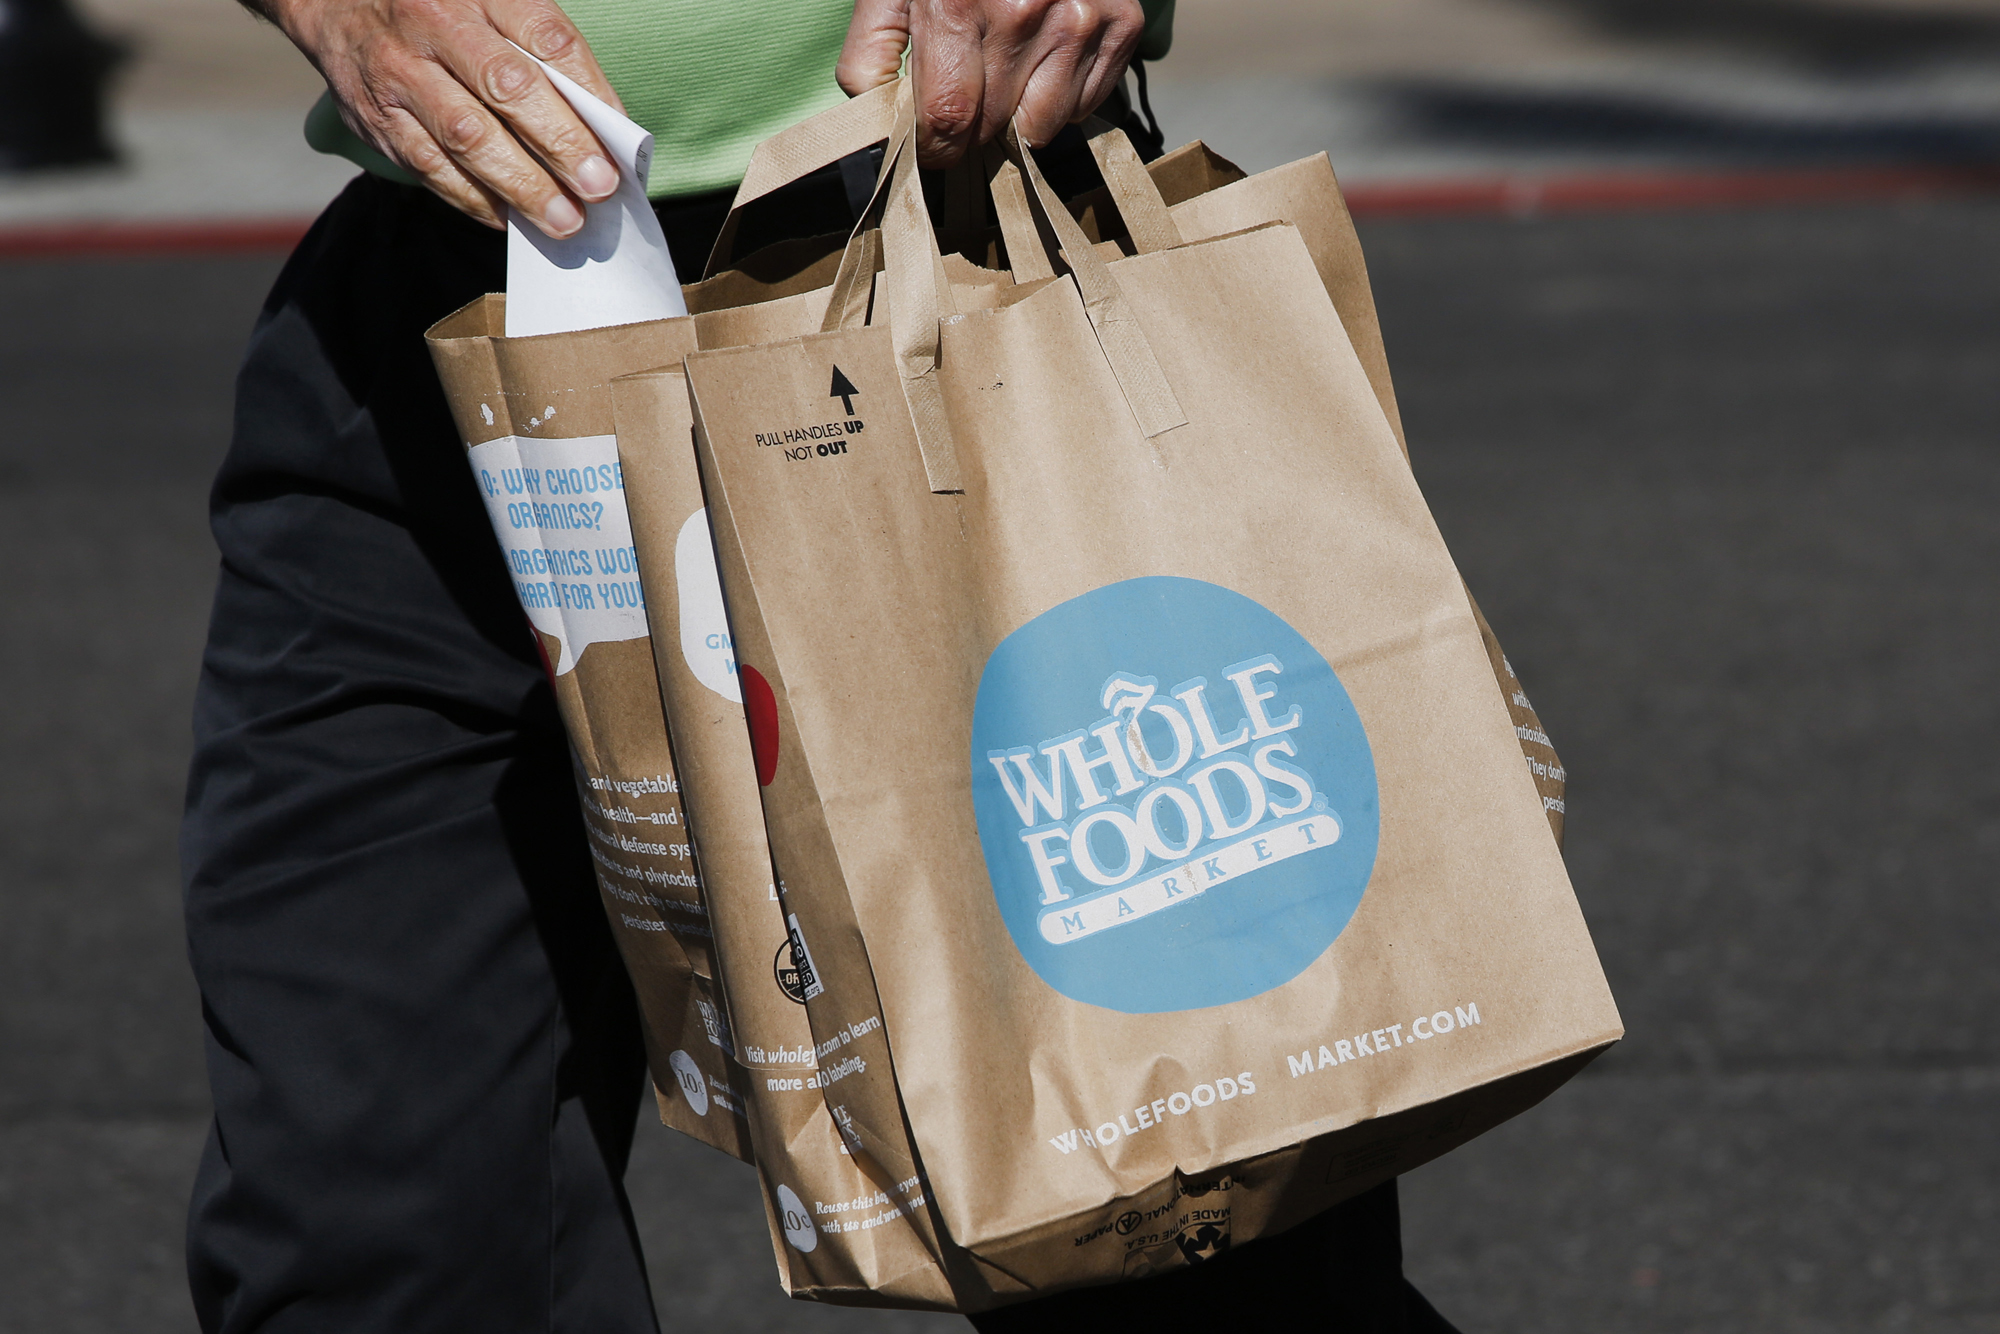 A customer carries shopping bags outside of a Whole Foods in El Segundo, Calif., Nov. 5, 2013.